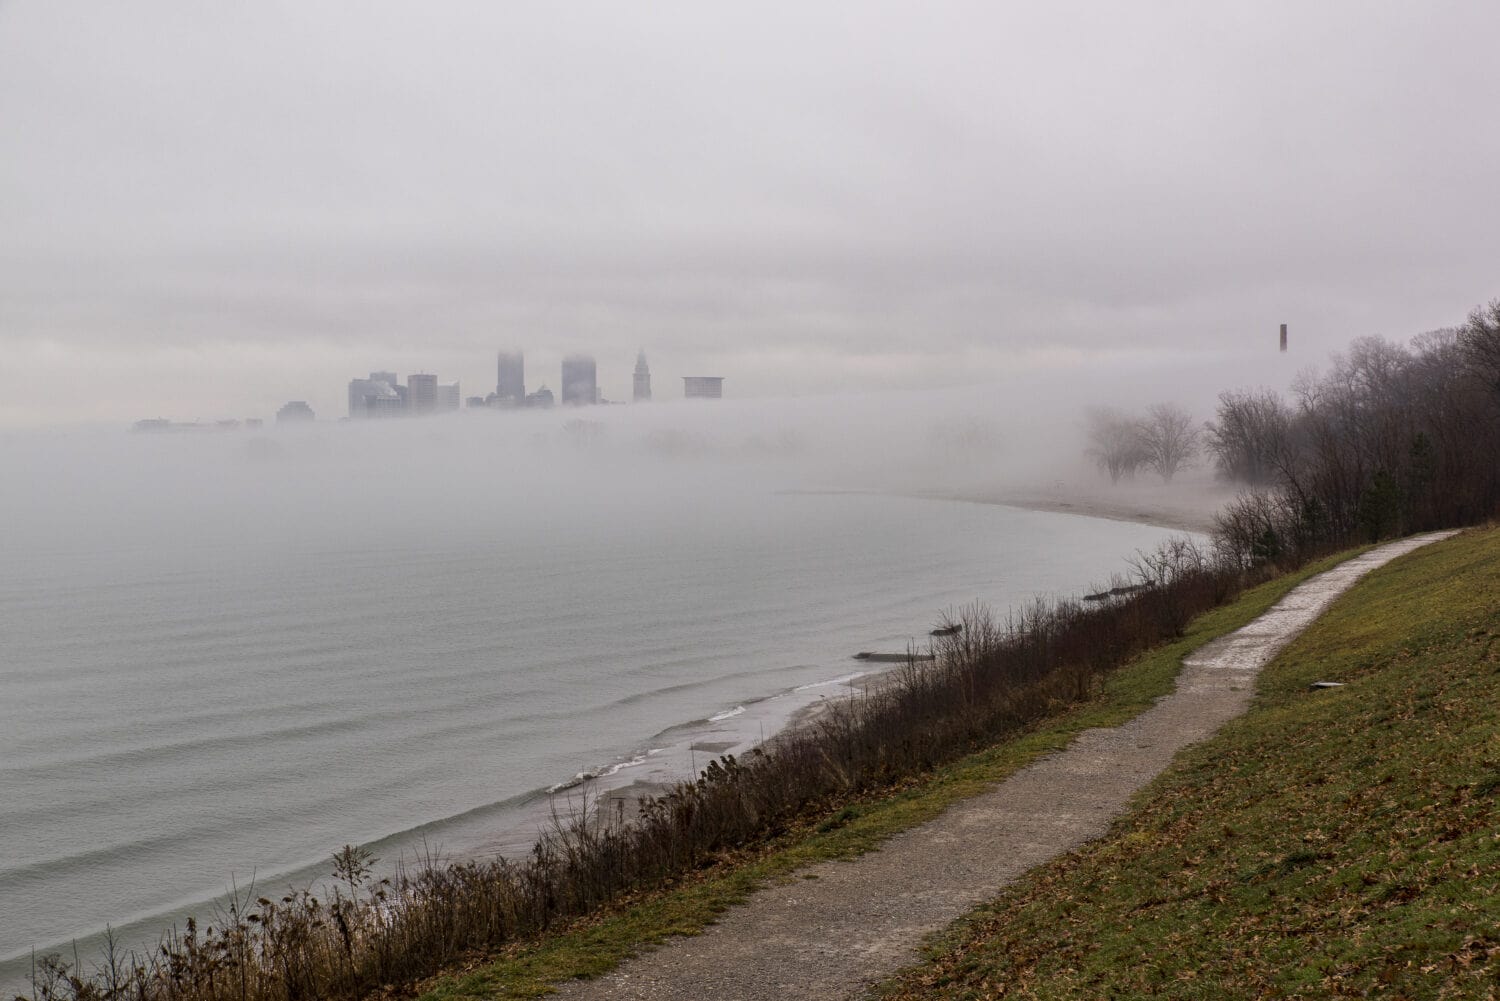 A foggy view of Lake Erie and downtown Cleveland, Ohio from Edgewater Park / Reservation.